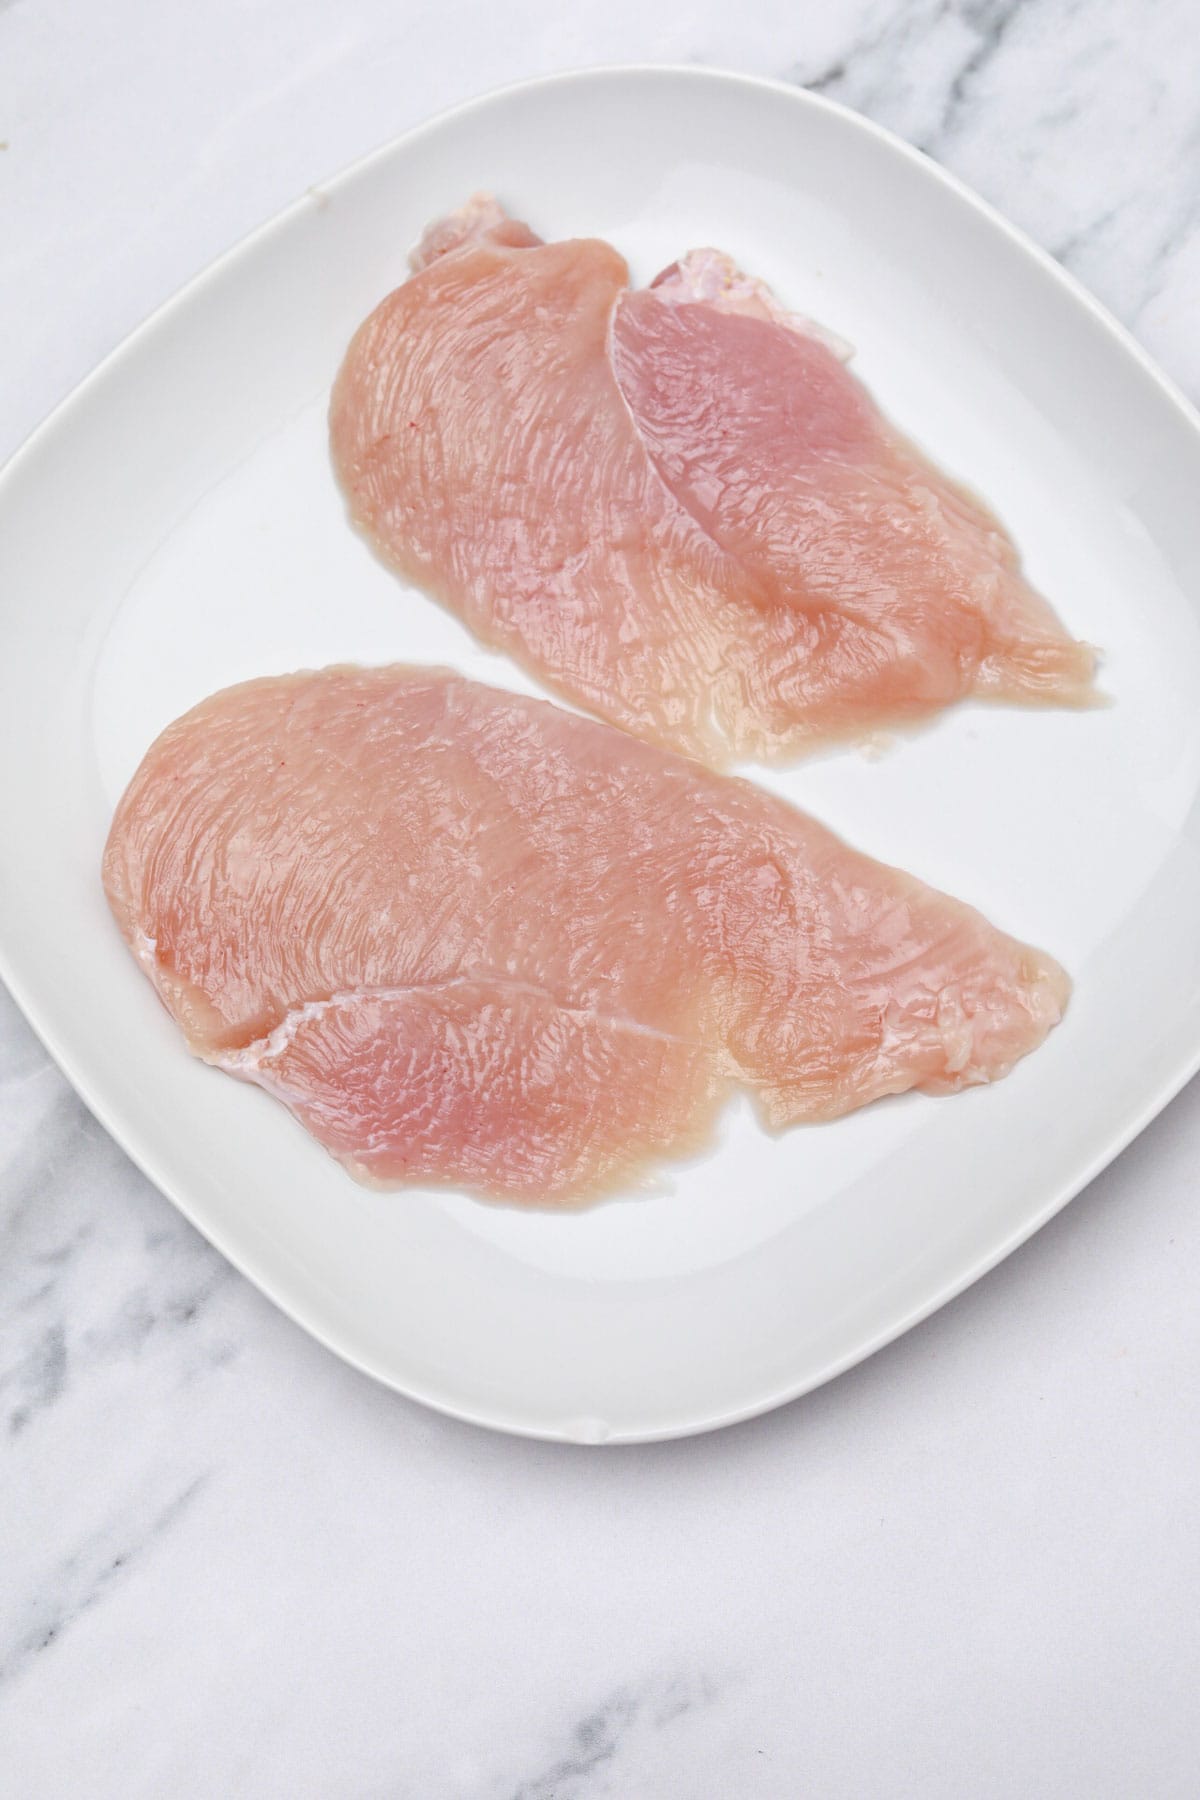 chicken breast sliced into thin pieces.